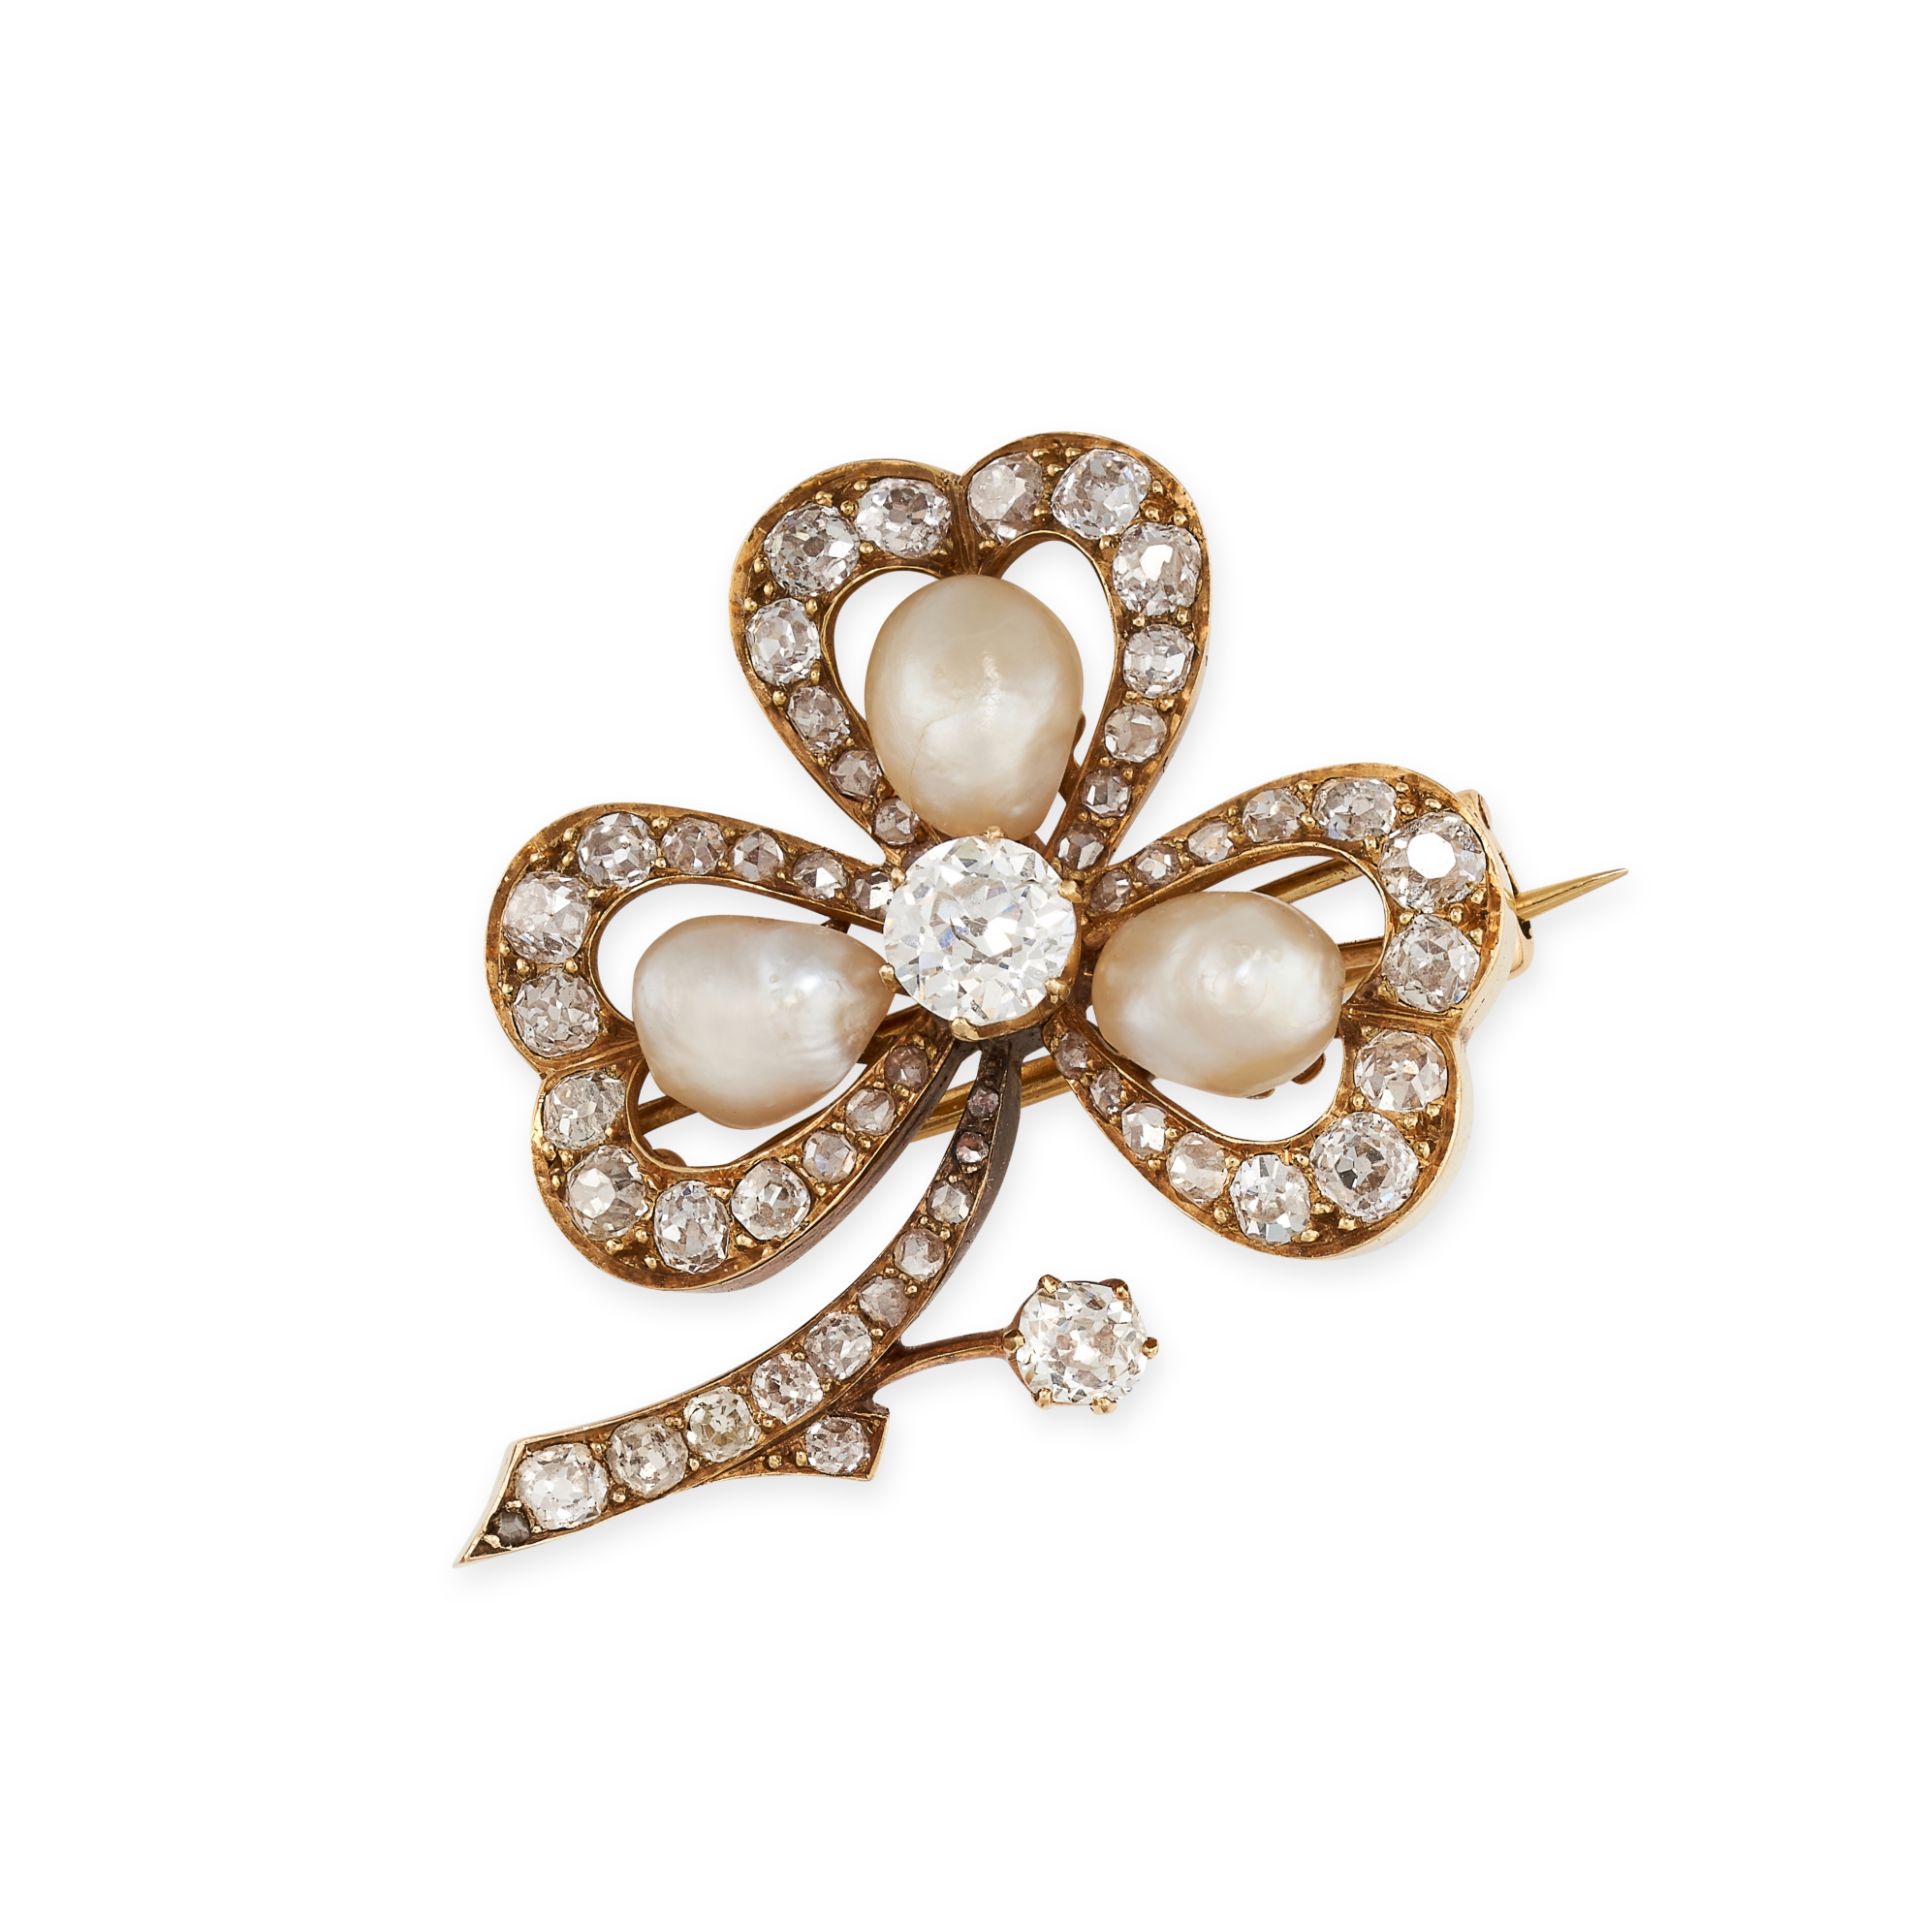 AN ANTIQUE VICTORIAN PEARL AND DIAMOND CLOVER BROOCH, LATE 19TH CENTURY in yellow gold, designed